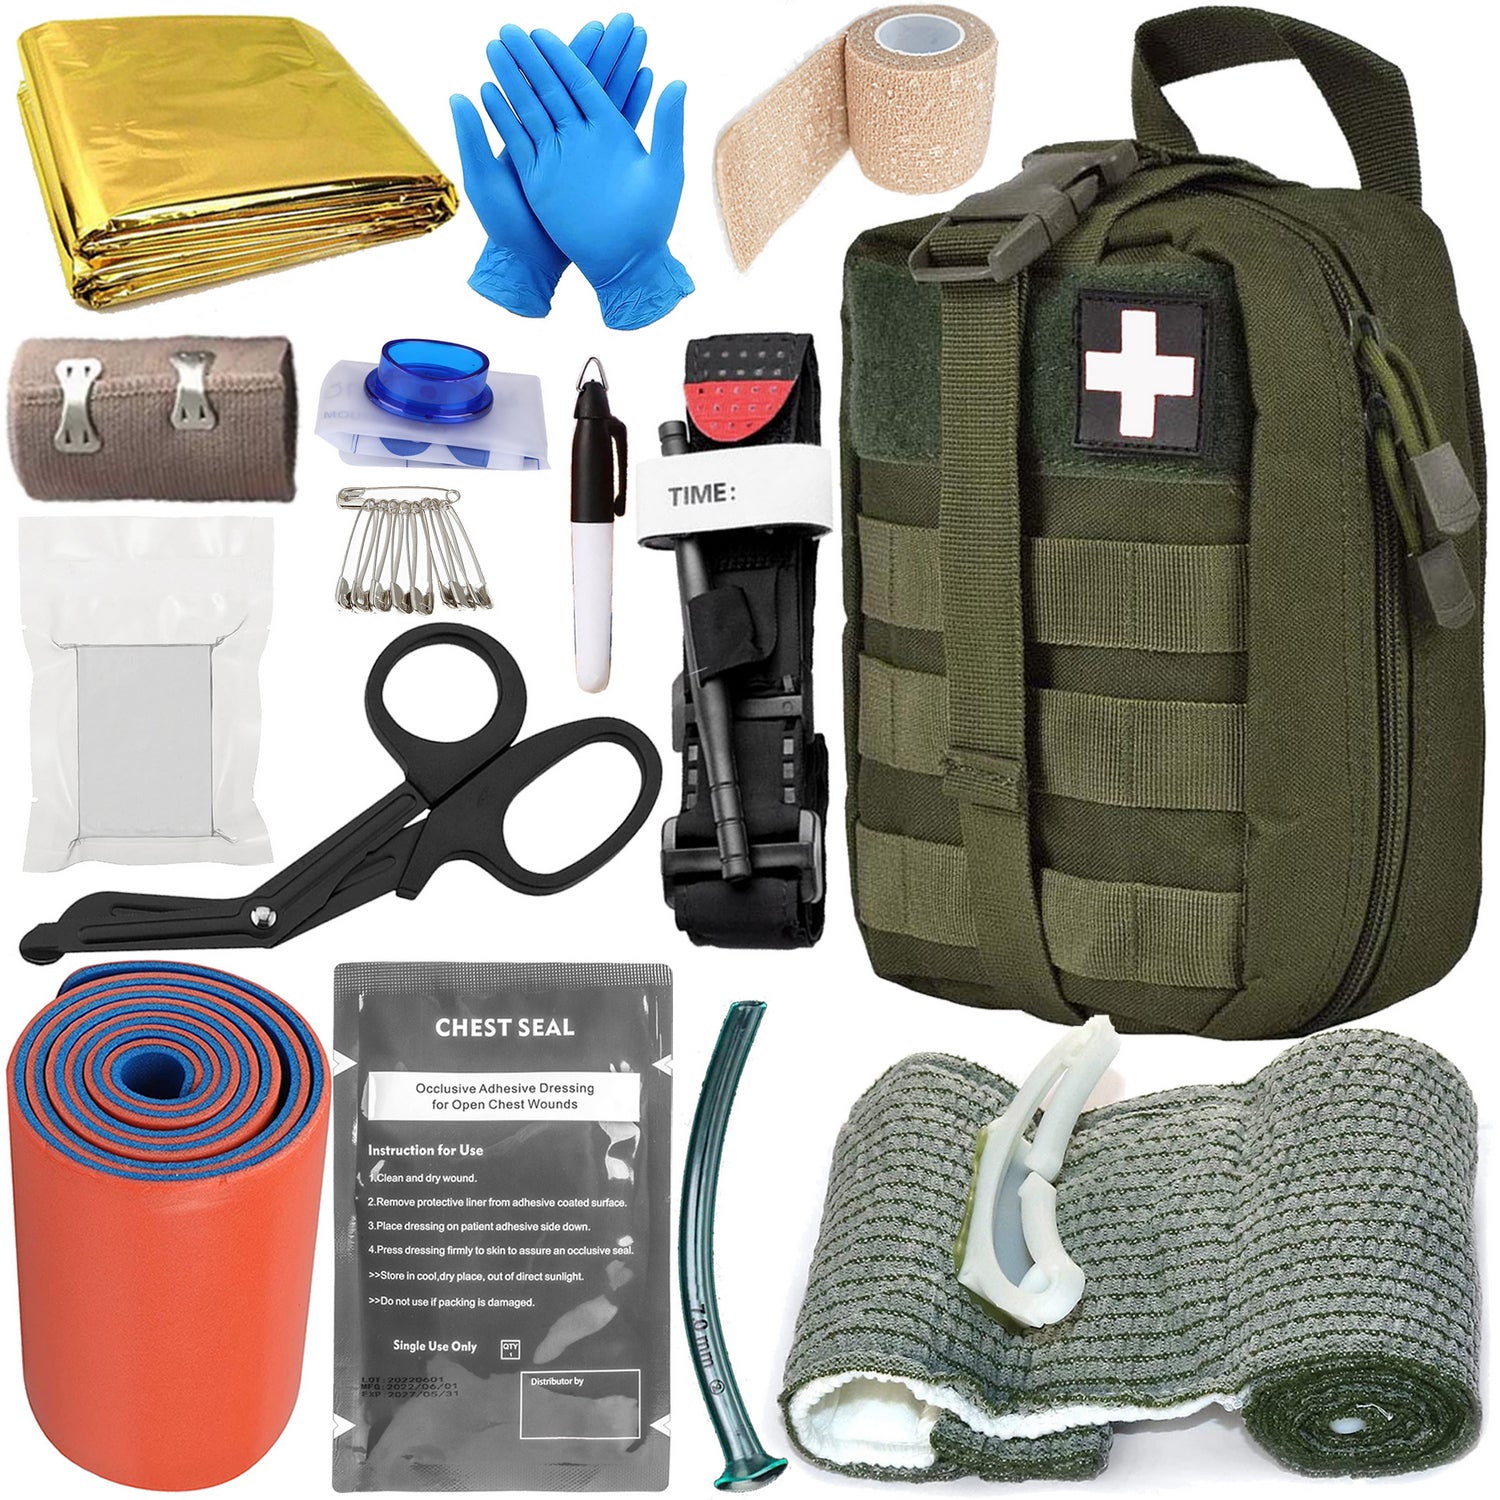 Plastic Case 5'' x 8'' x 3'' w/ Handle Gasket - EMT Bags, Backpacks and  First Aid Kit Containers